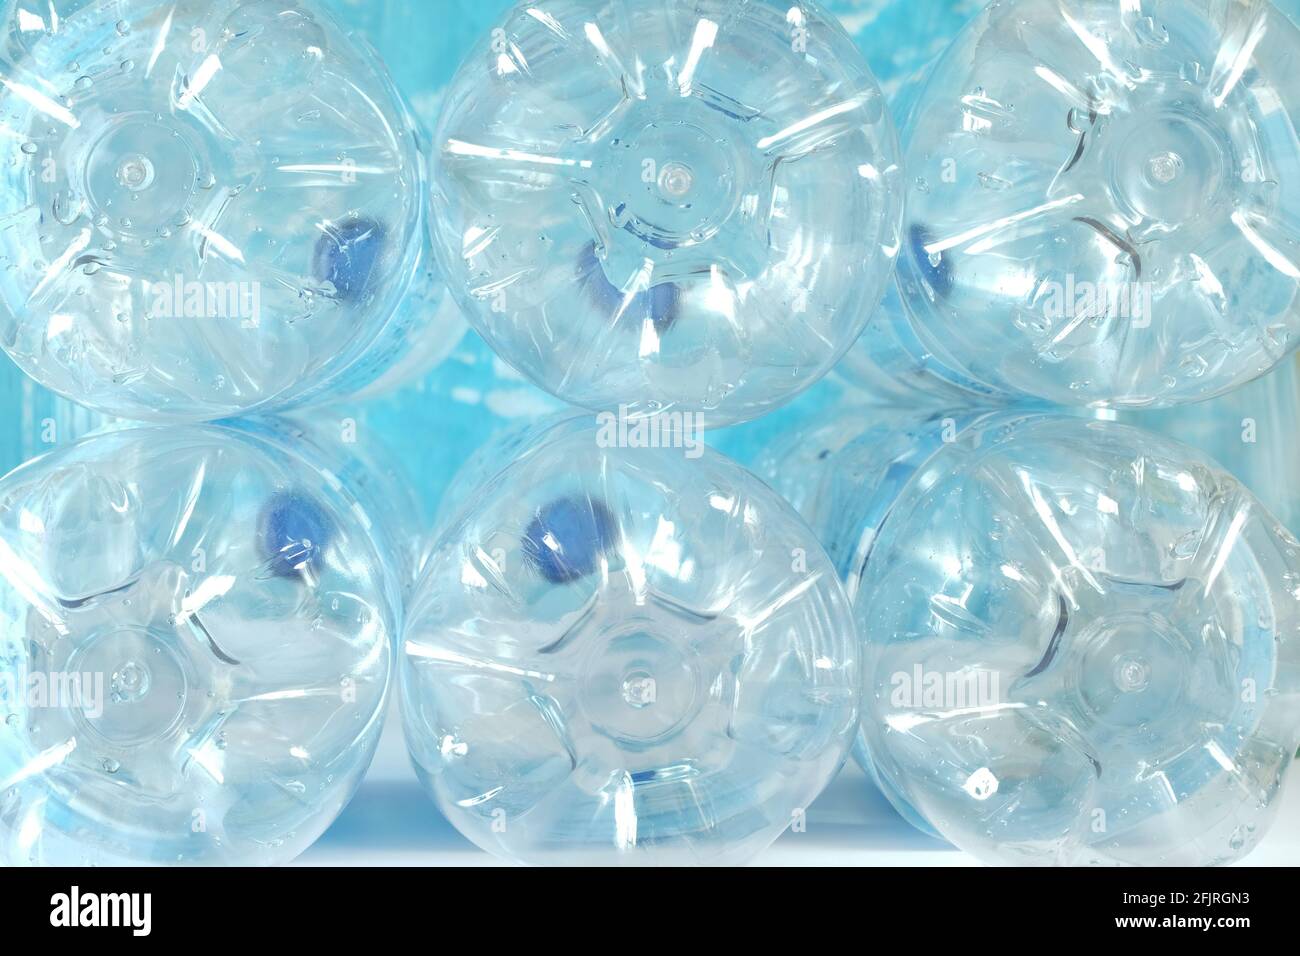 Plastic deposit bottle,recycling materials,environment protection,recyclable plastics concept Stock Photo